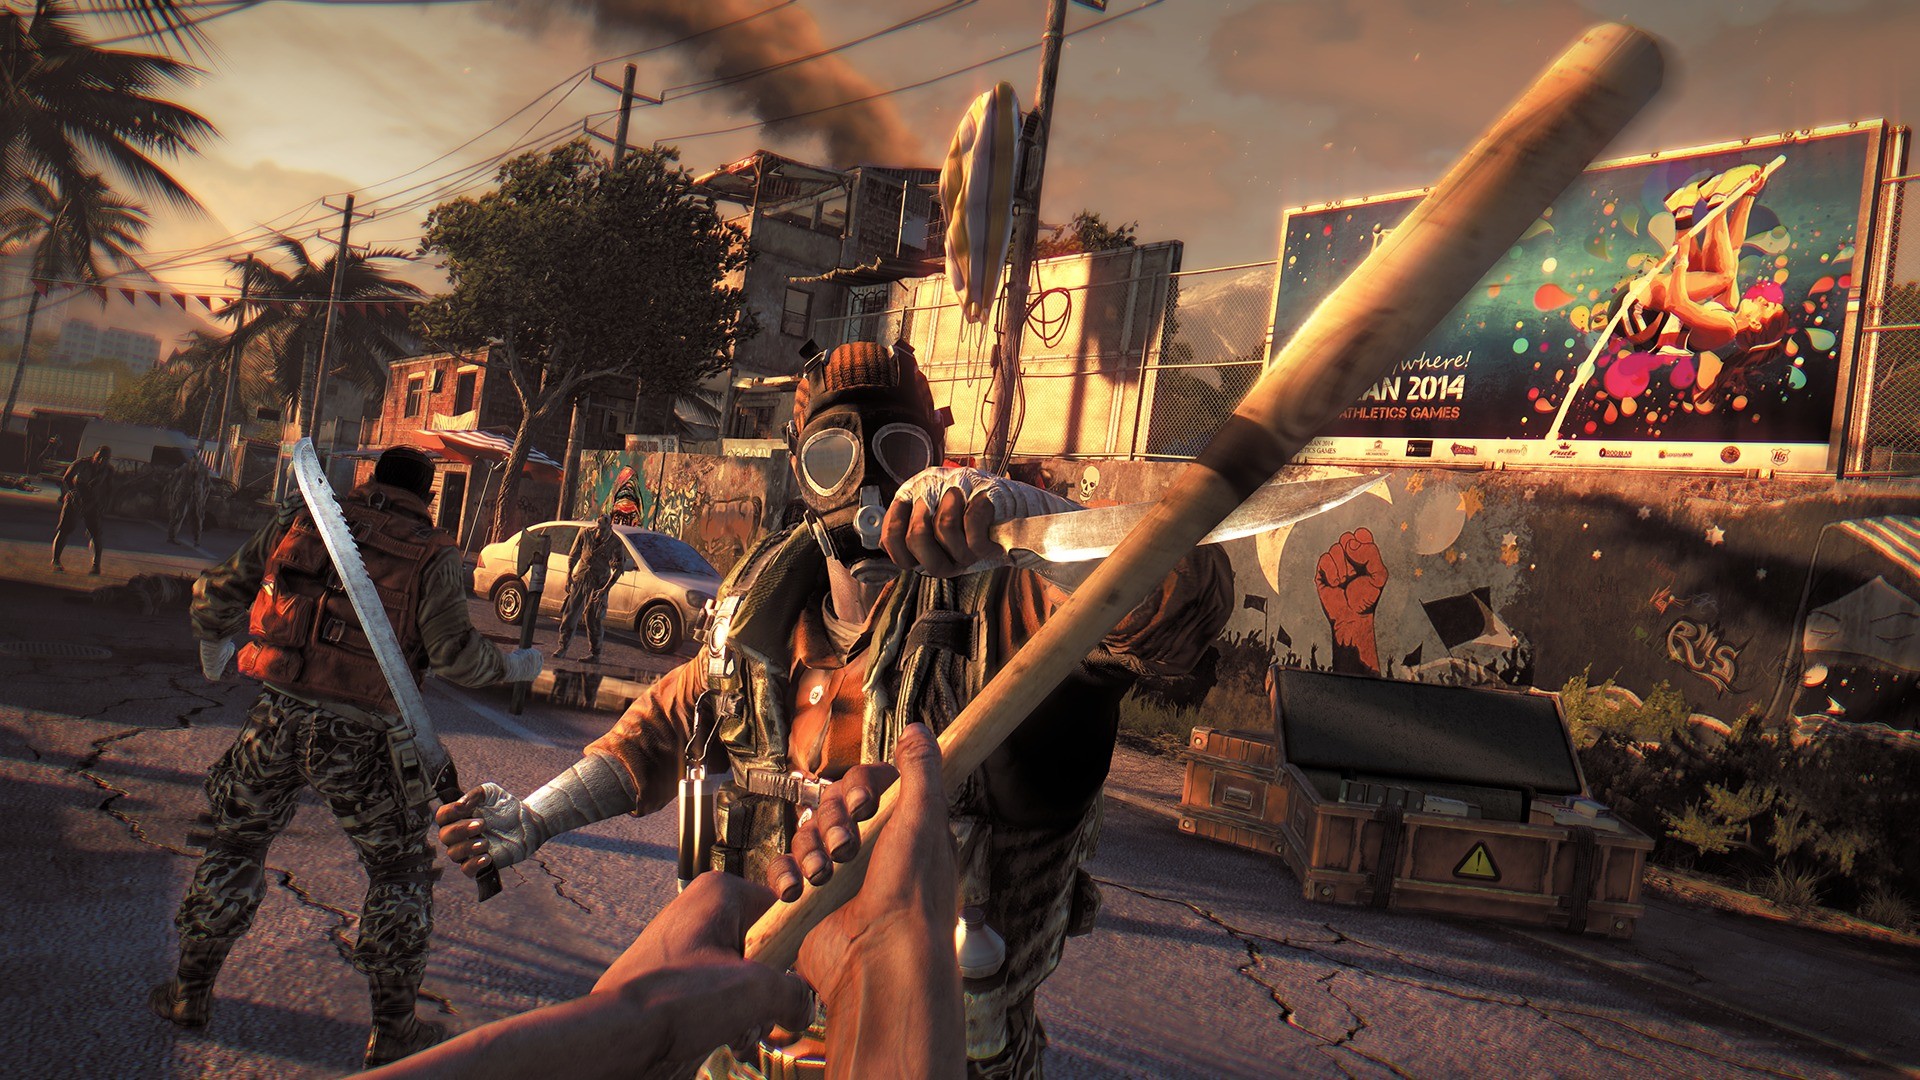 Dying Light: Definitive Edition TR XBOX One CD Key